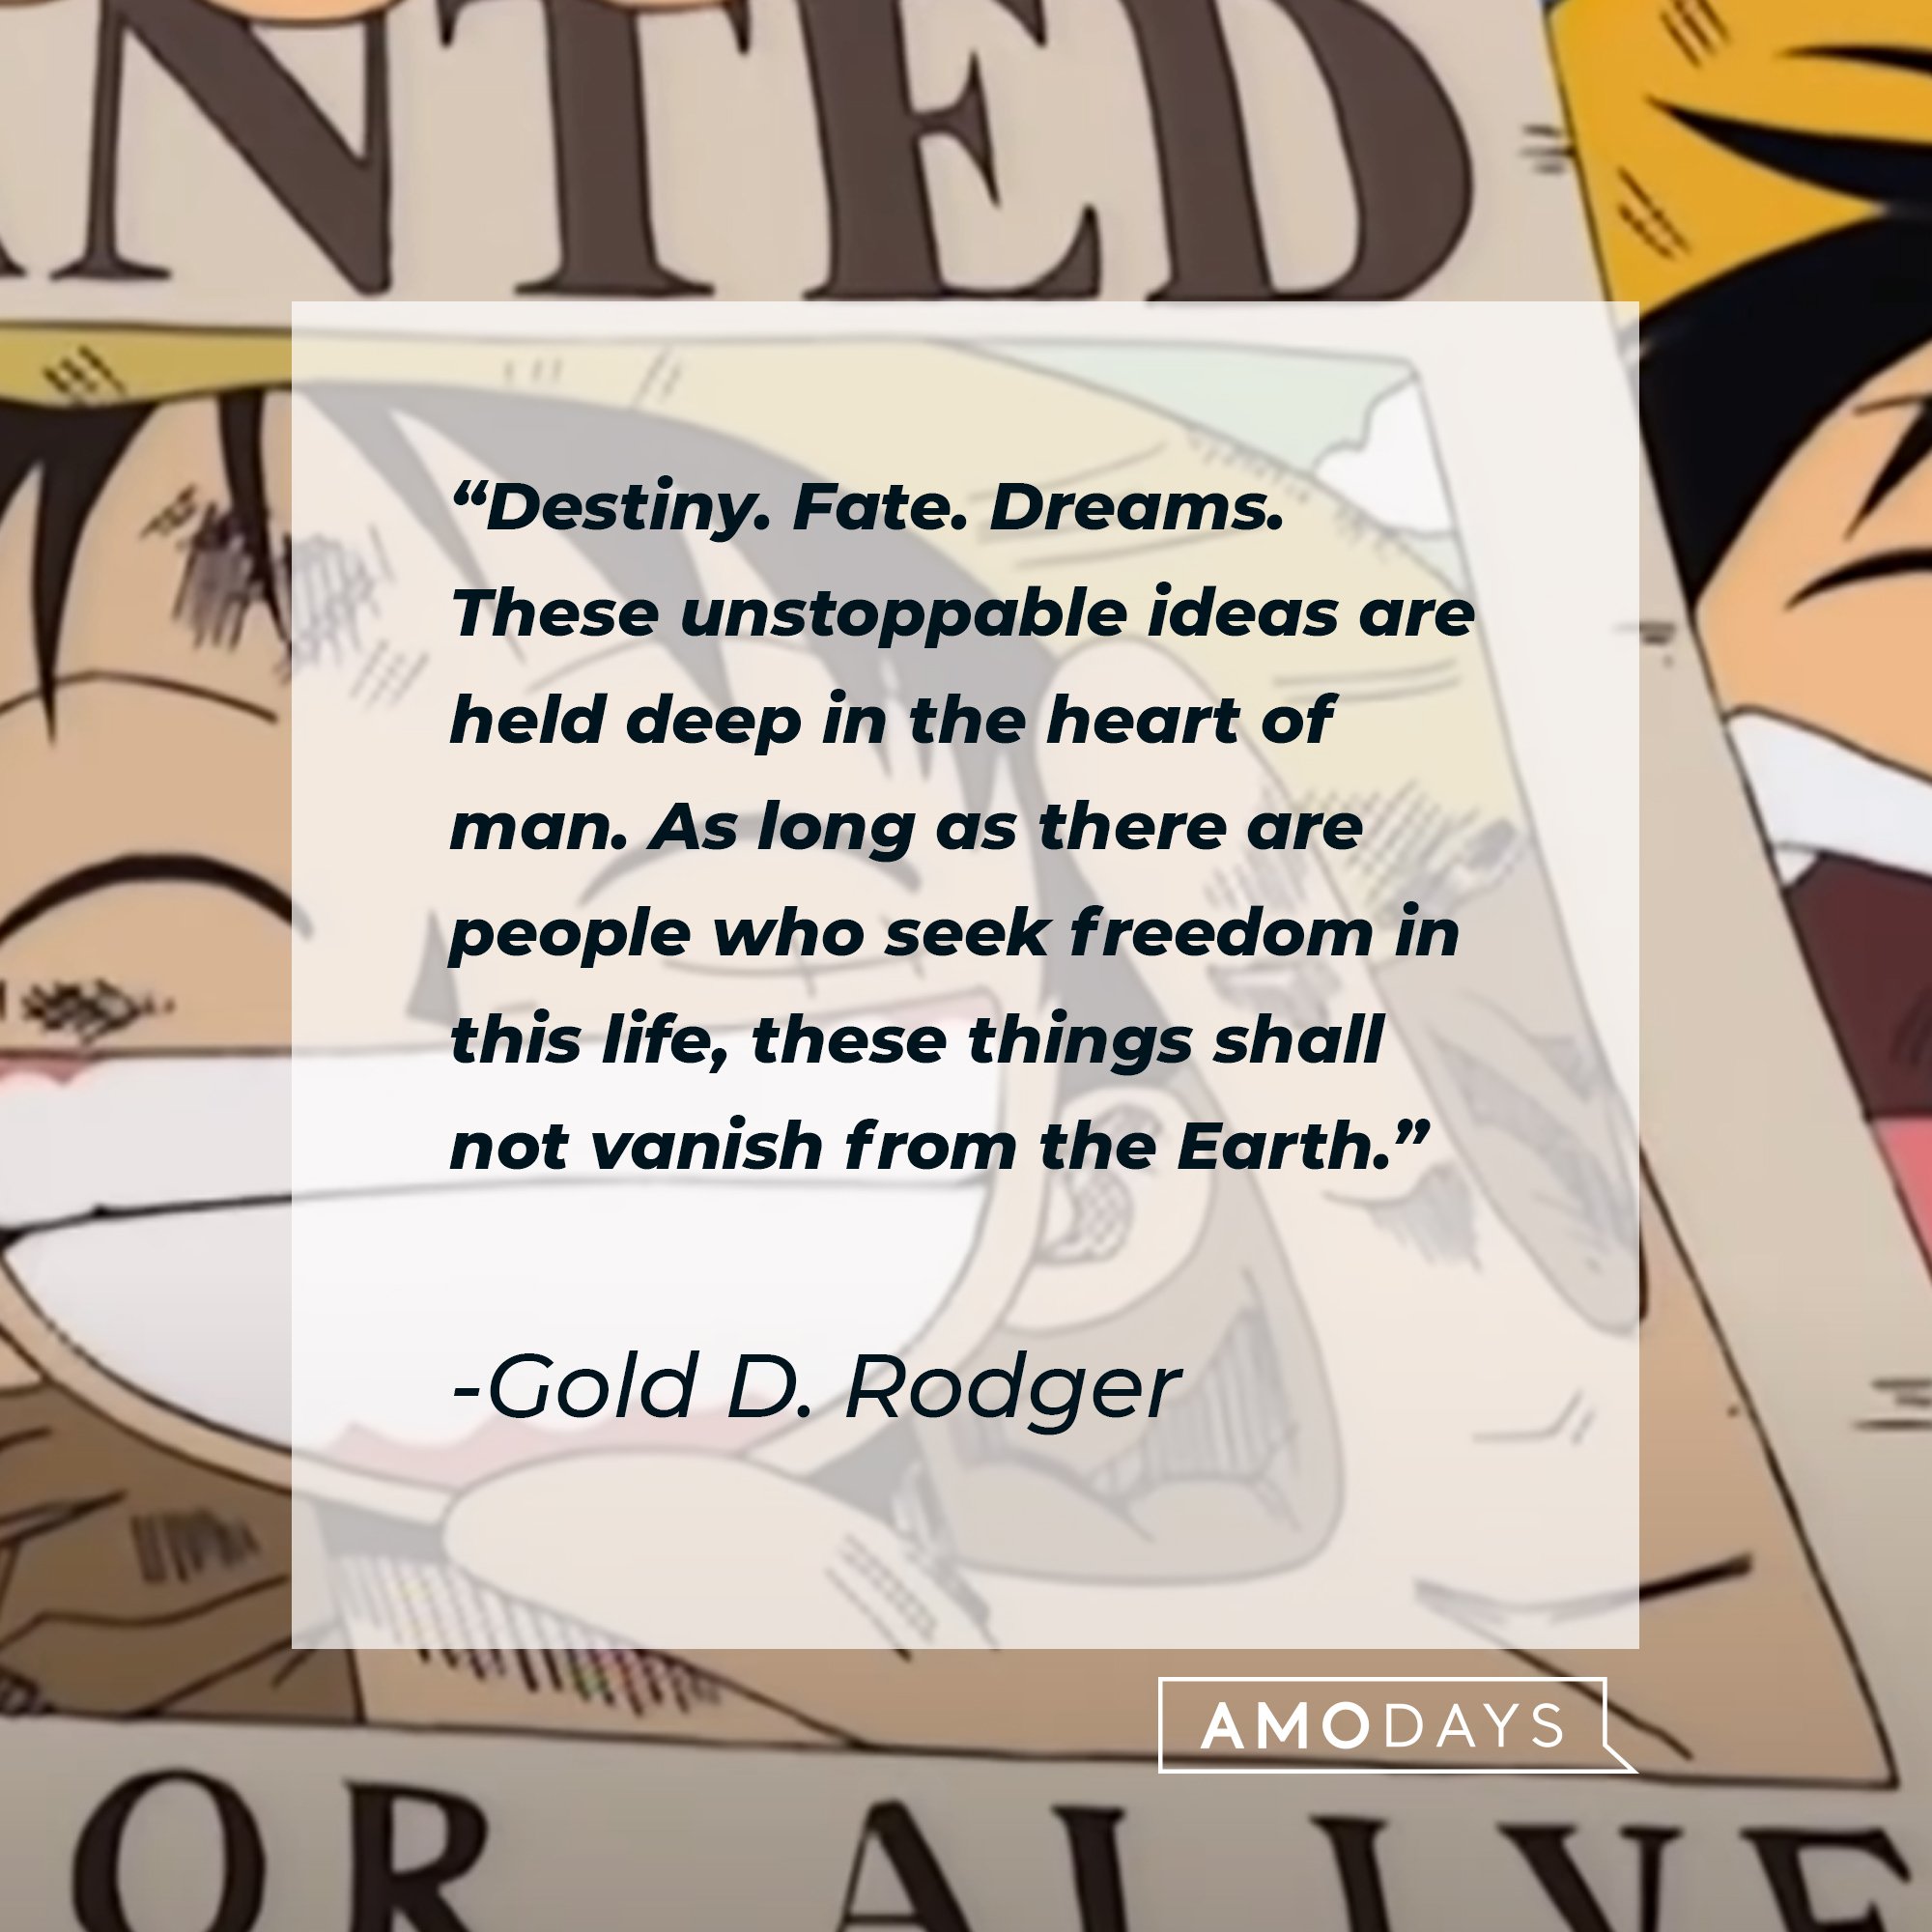  Gol D. Roger’s quote: "Destiny. Fate. Dreams. These unstoppable ideas are held deep in the heart of man. As long as there are people who seek freedom in this life, these things shall not vanish from the Earth." | Image: AmoDays